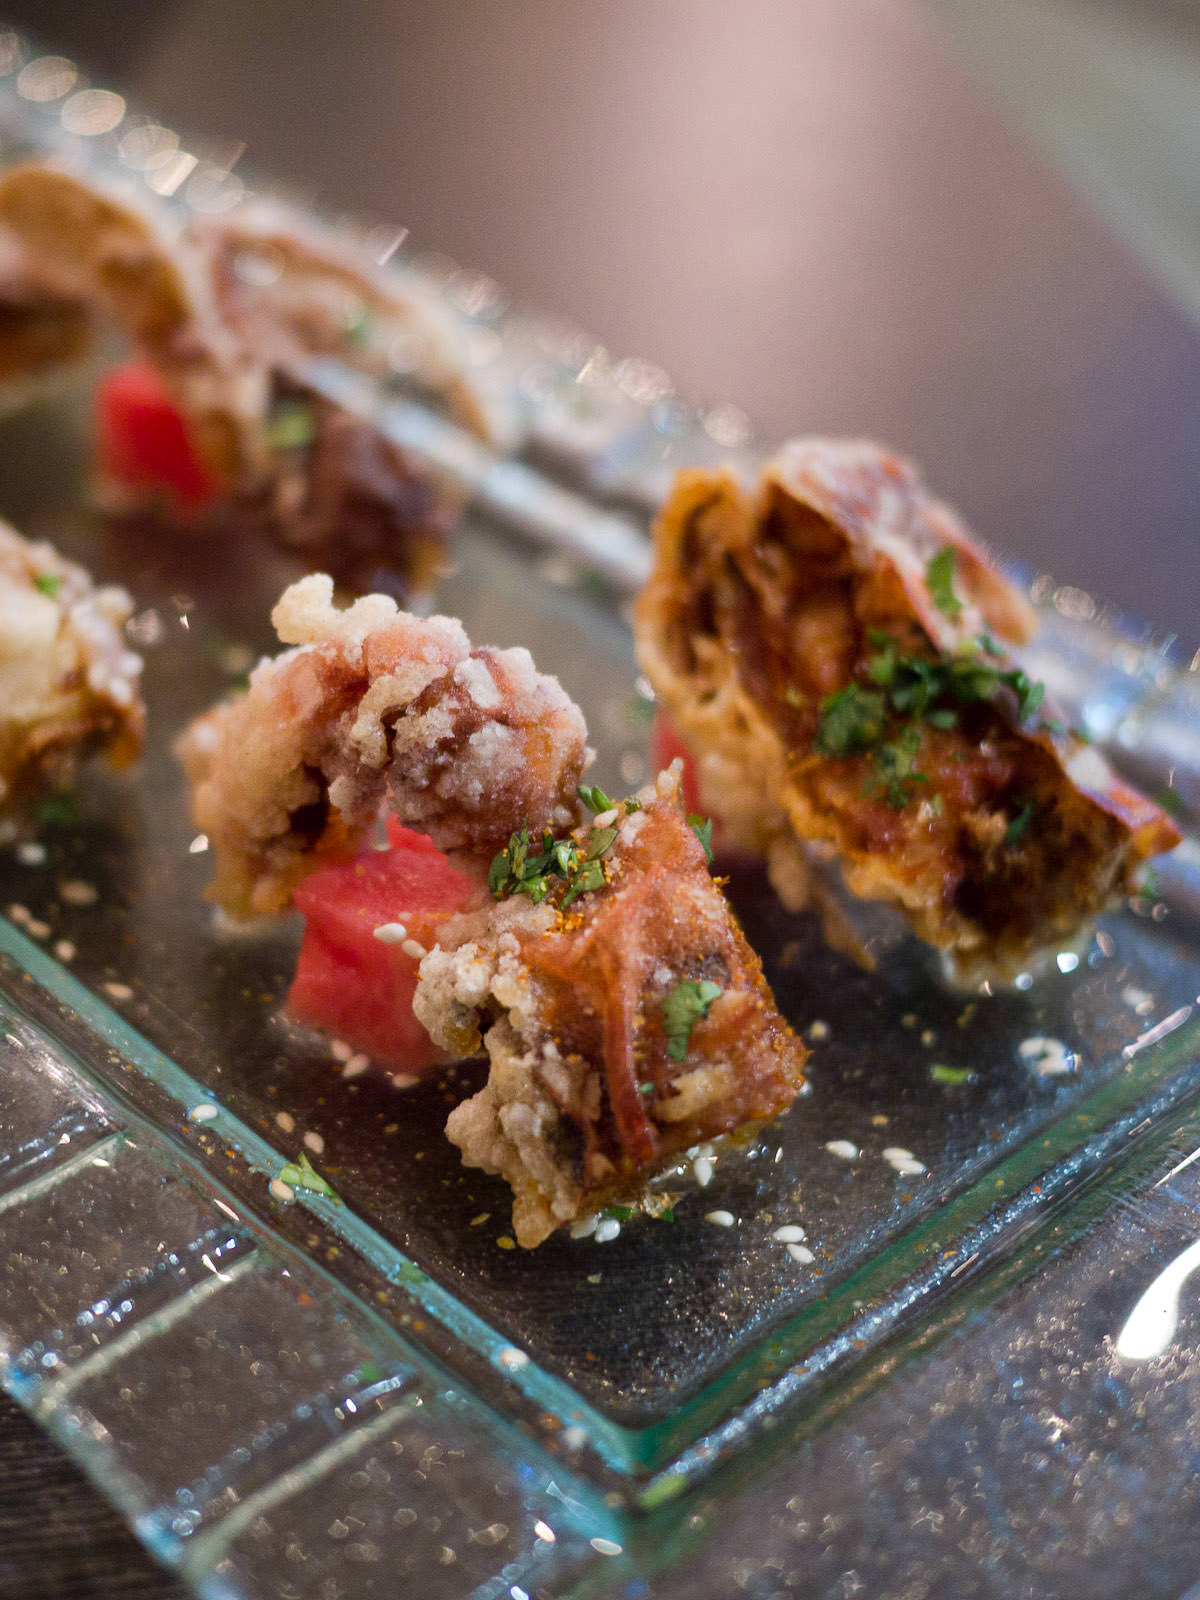 Soft shell crab with watermelon pieces and ginger vinaigrette (AU$14)